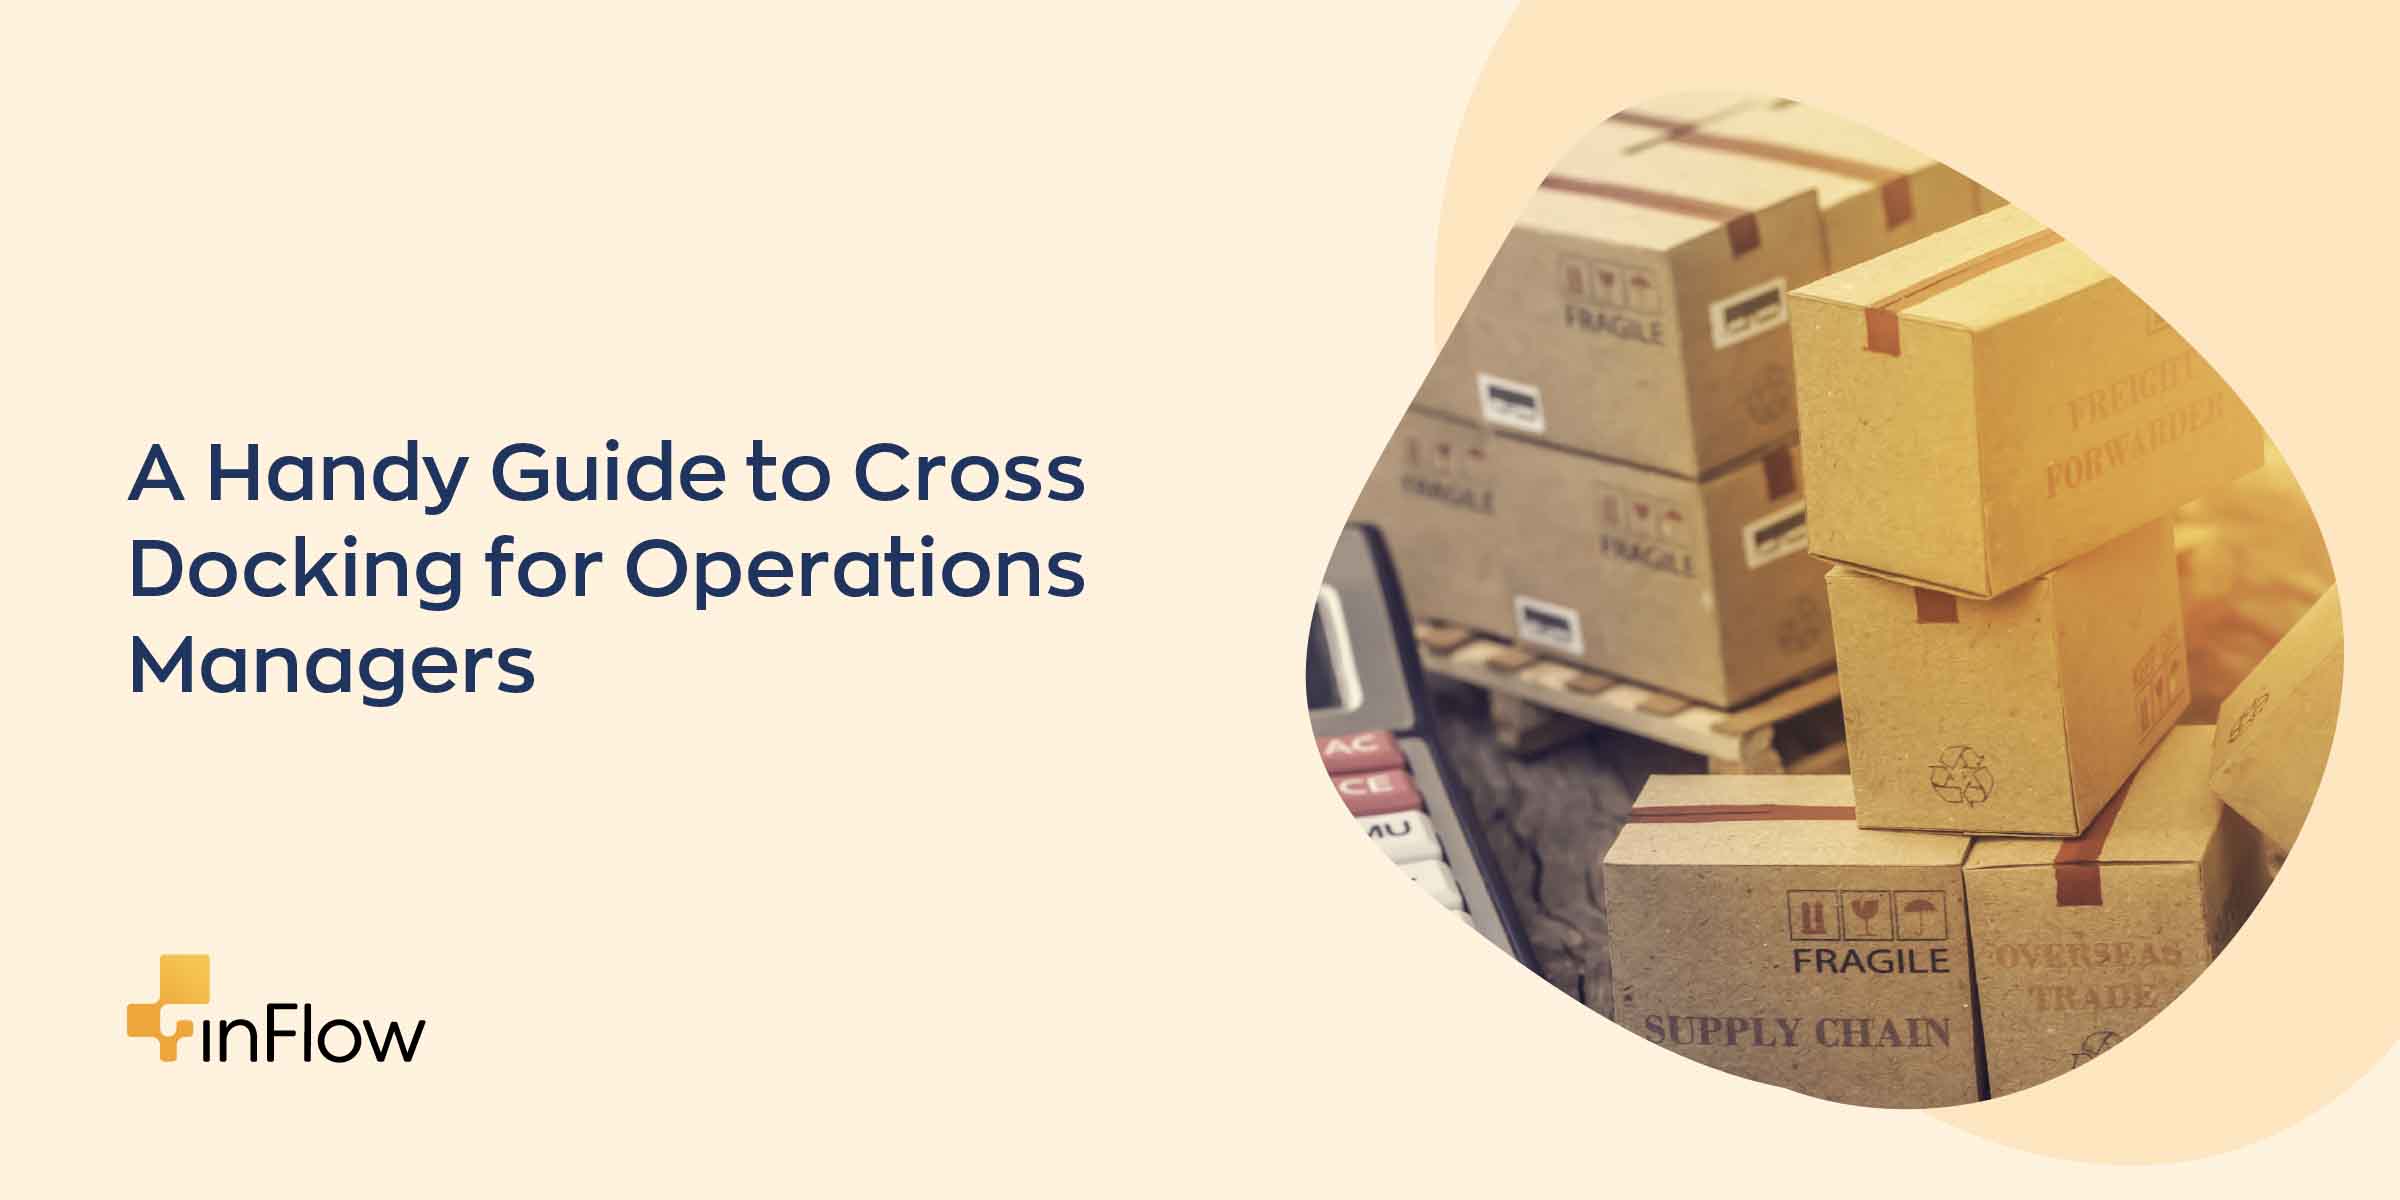 A Handy Guide to Cross Docking for Operations Managers